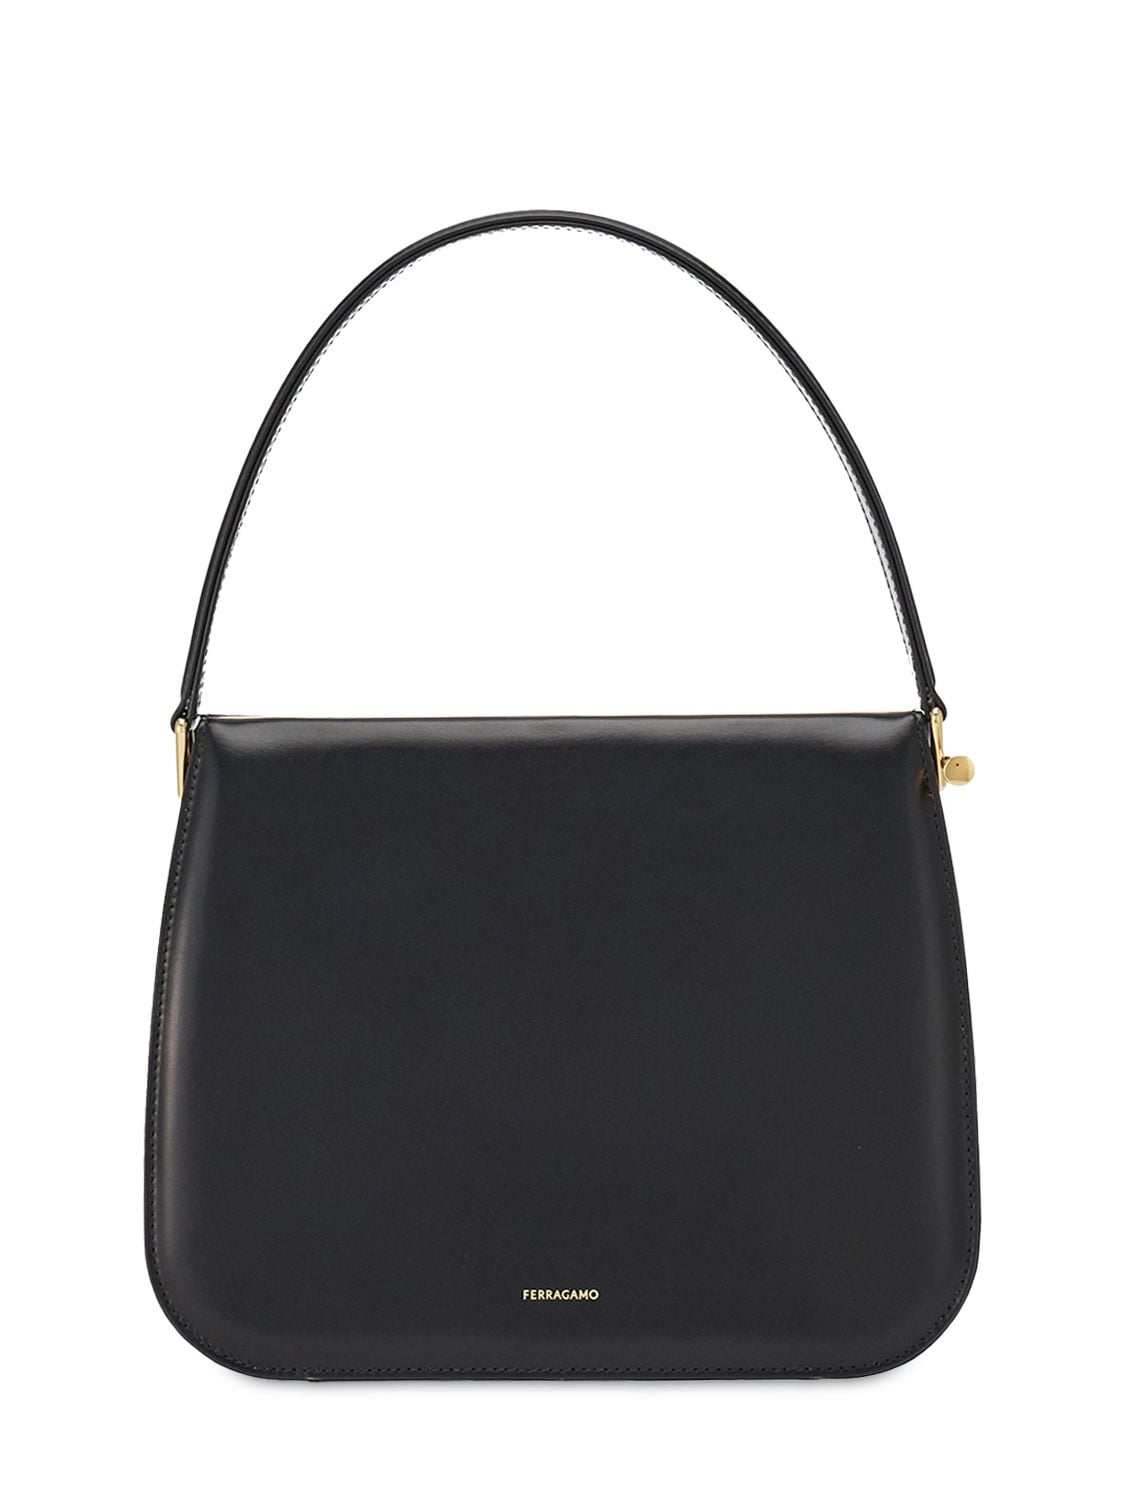 Ferragamo Small Frame Leather Top Handle Bag In Double Black